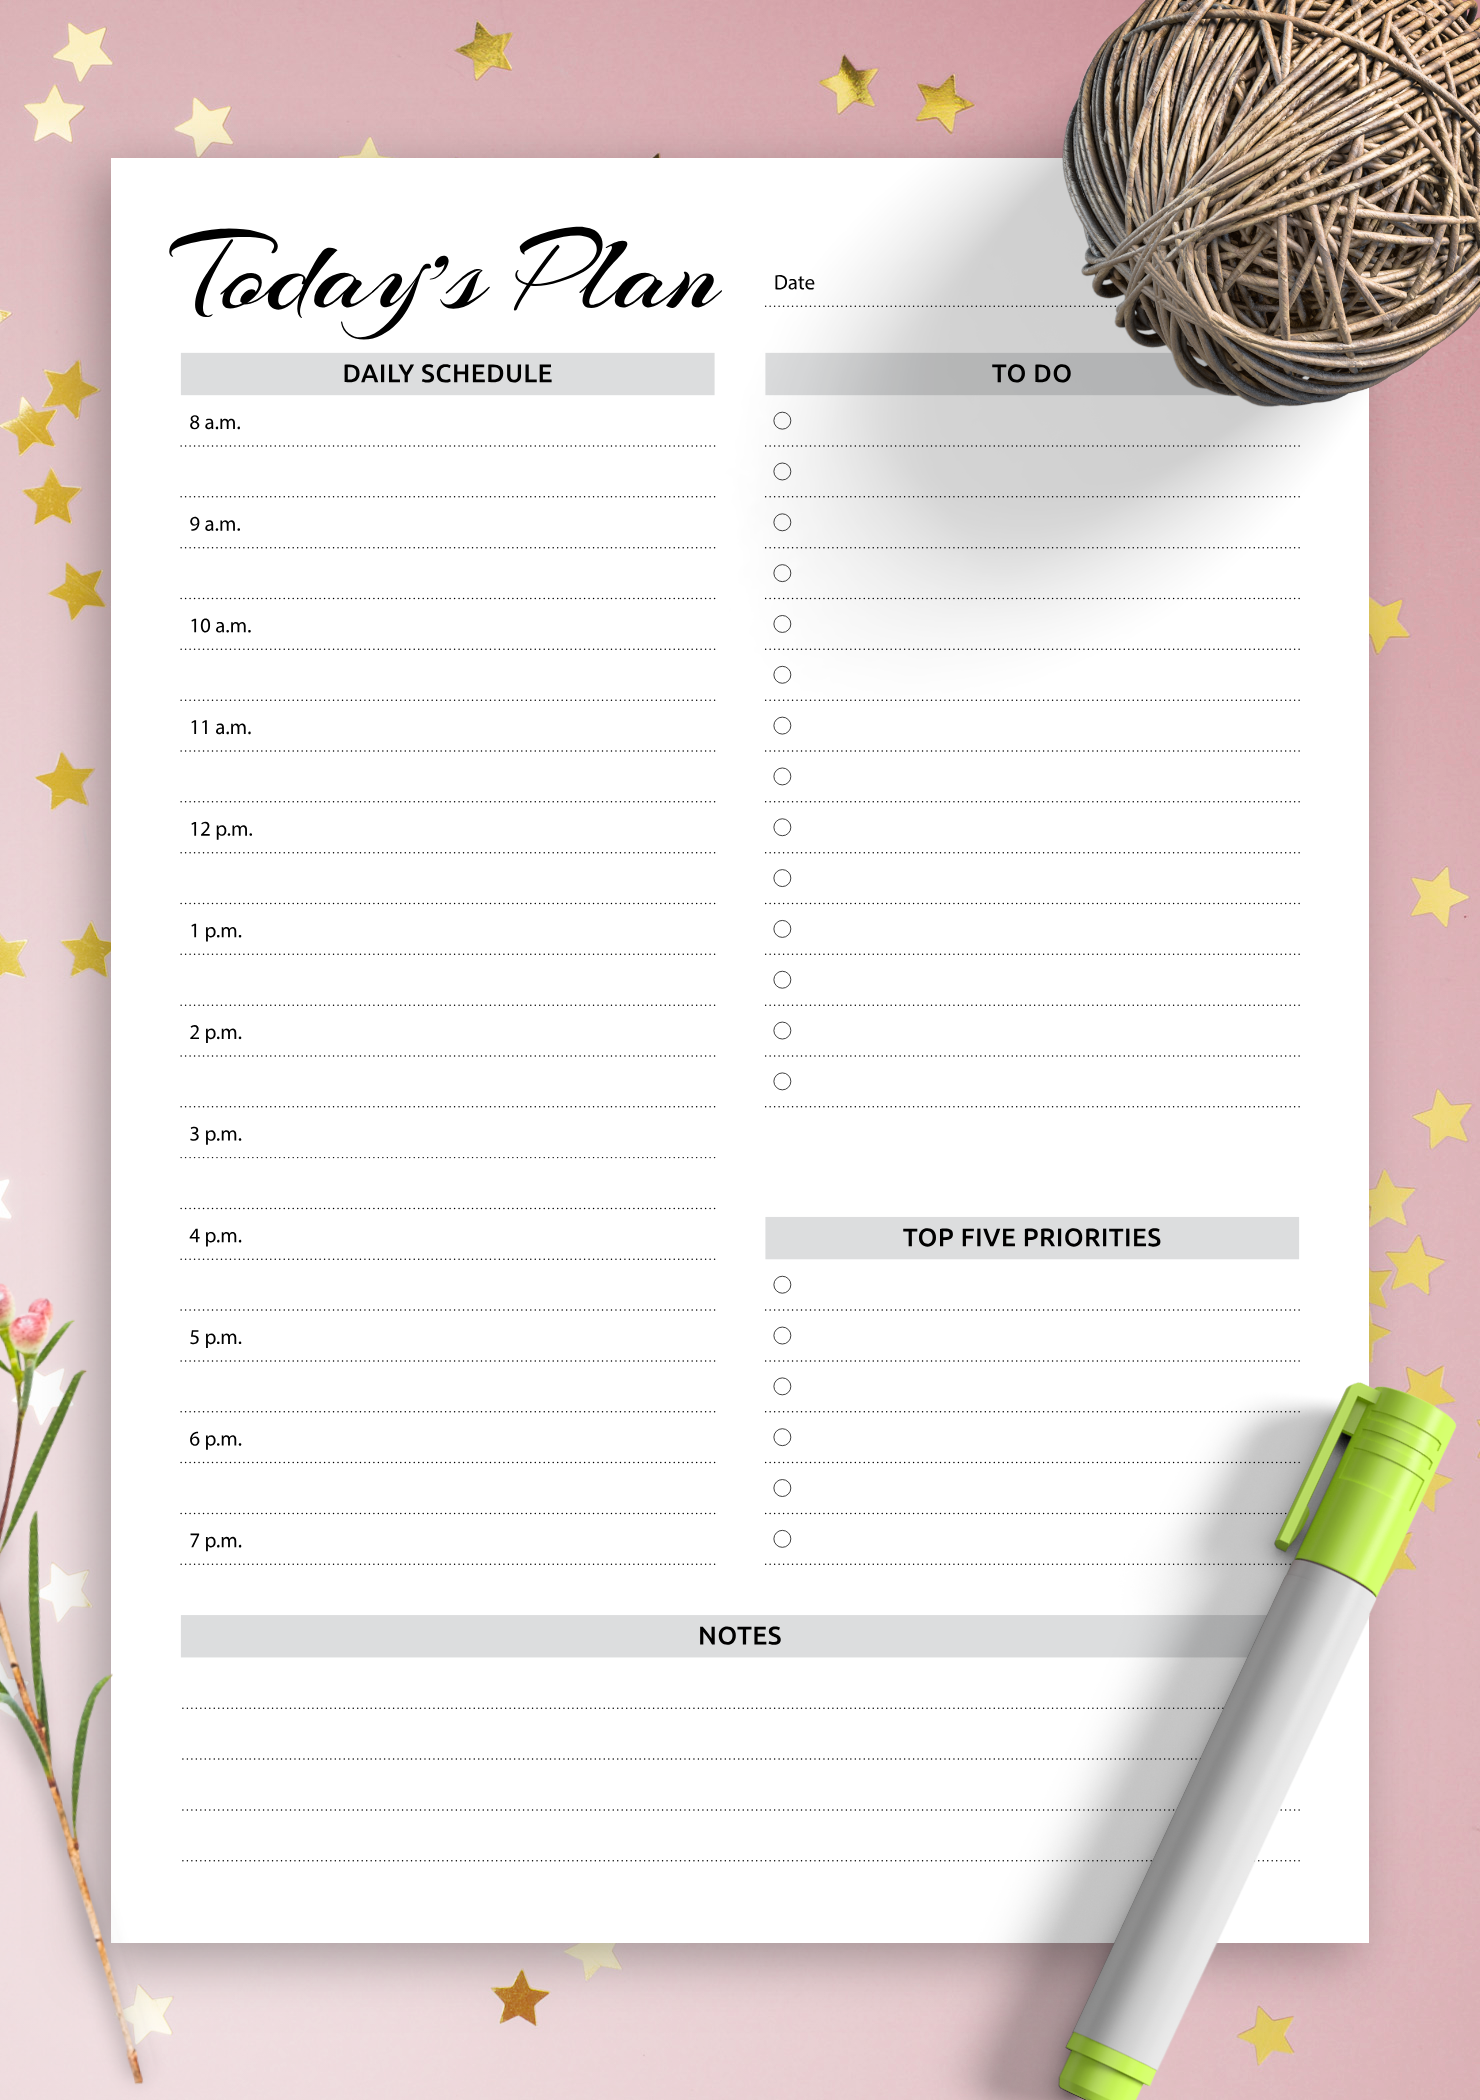 Hourly Planner Template